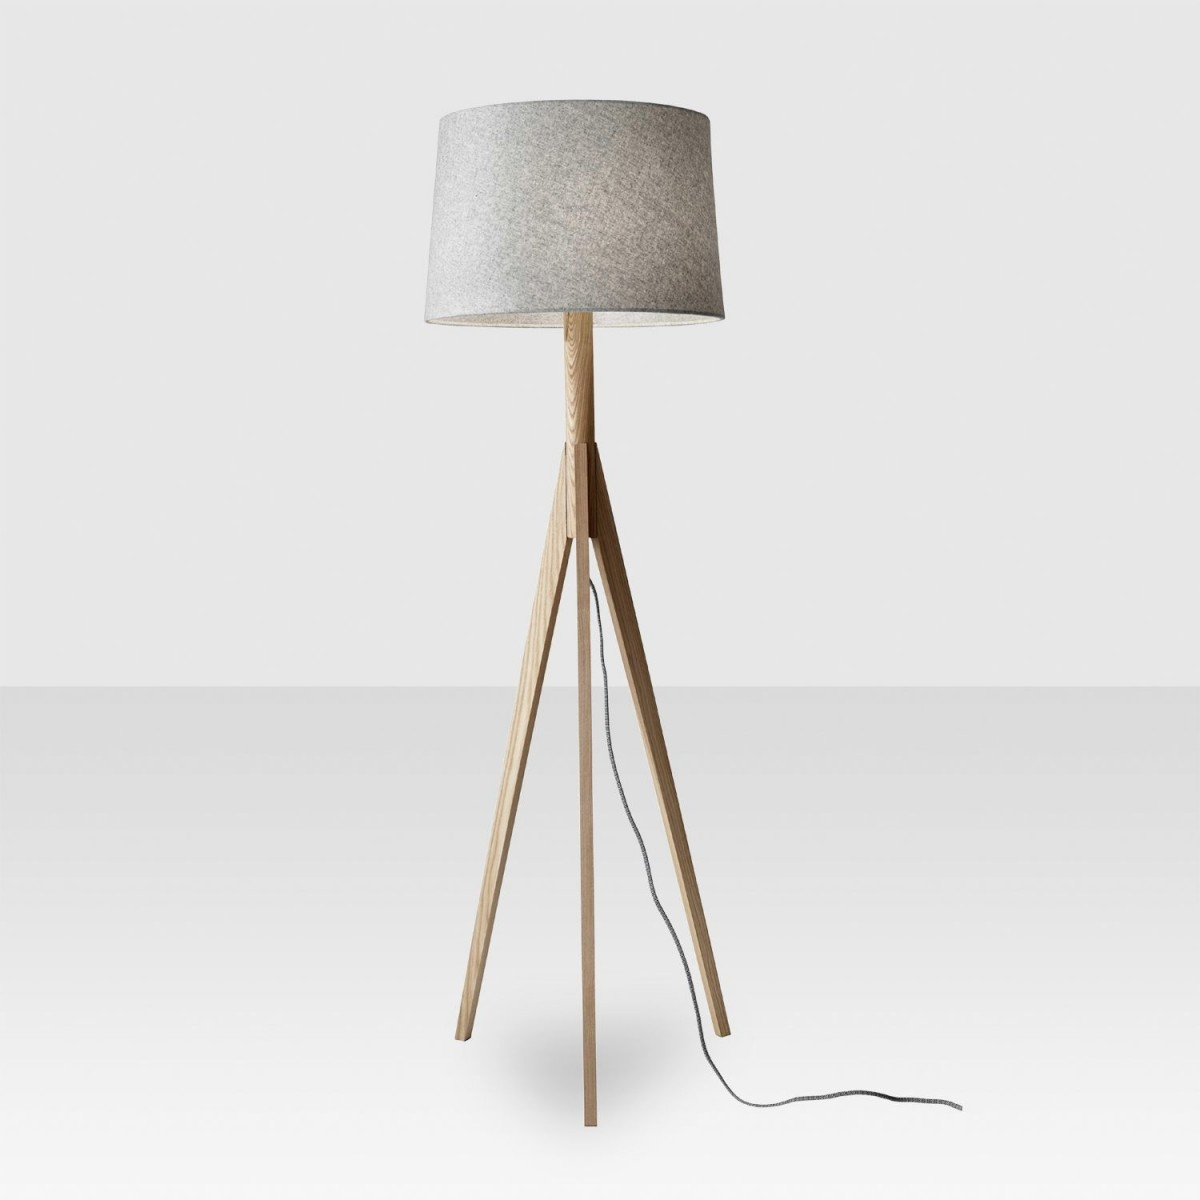 Tripod Wood Floor Lamp Natural Elte Market intended for dimensions 1200 X 1200